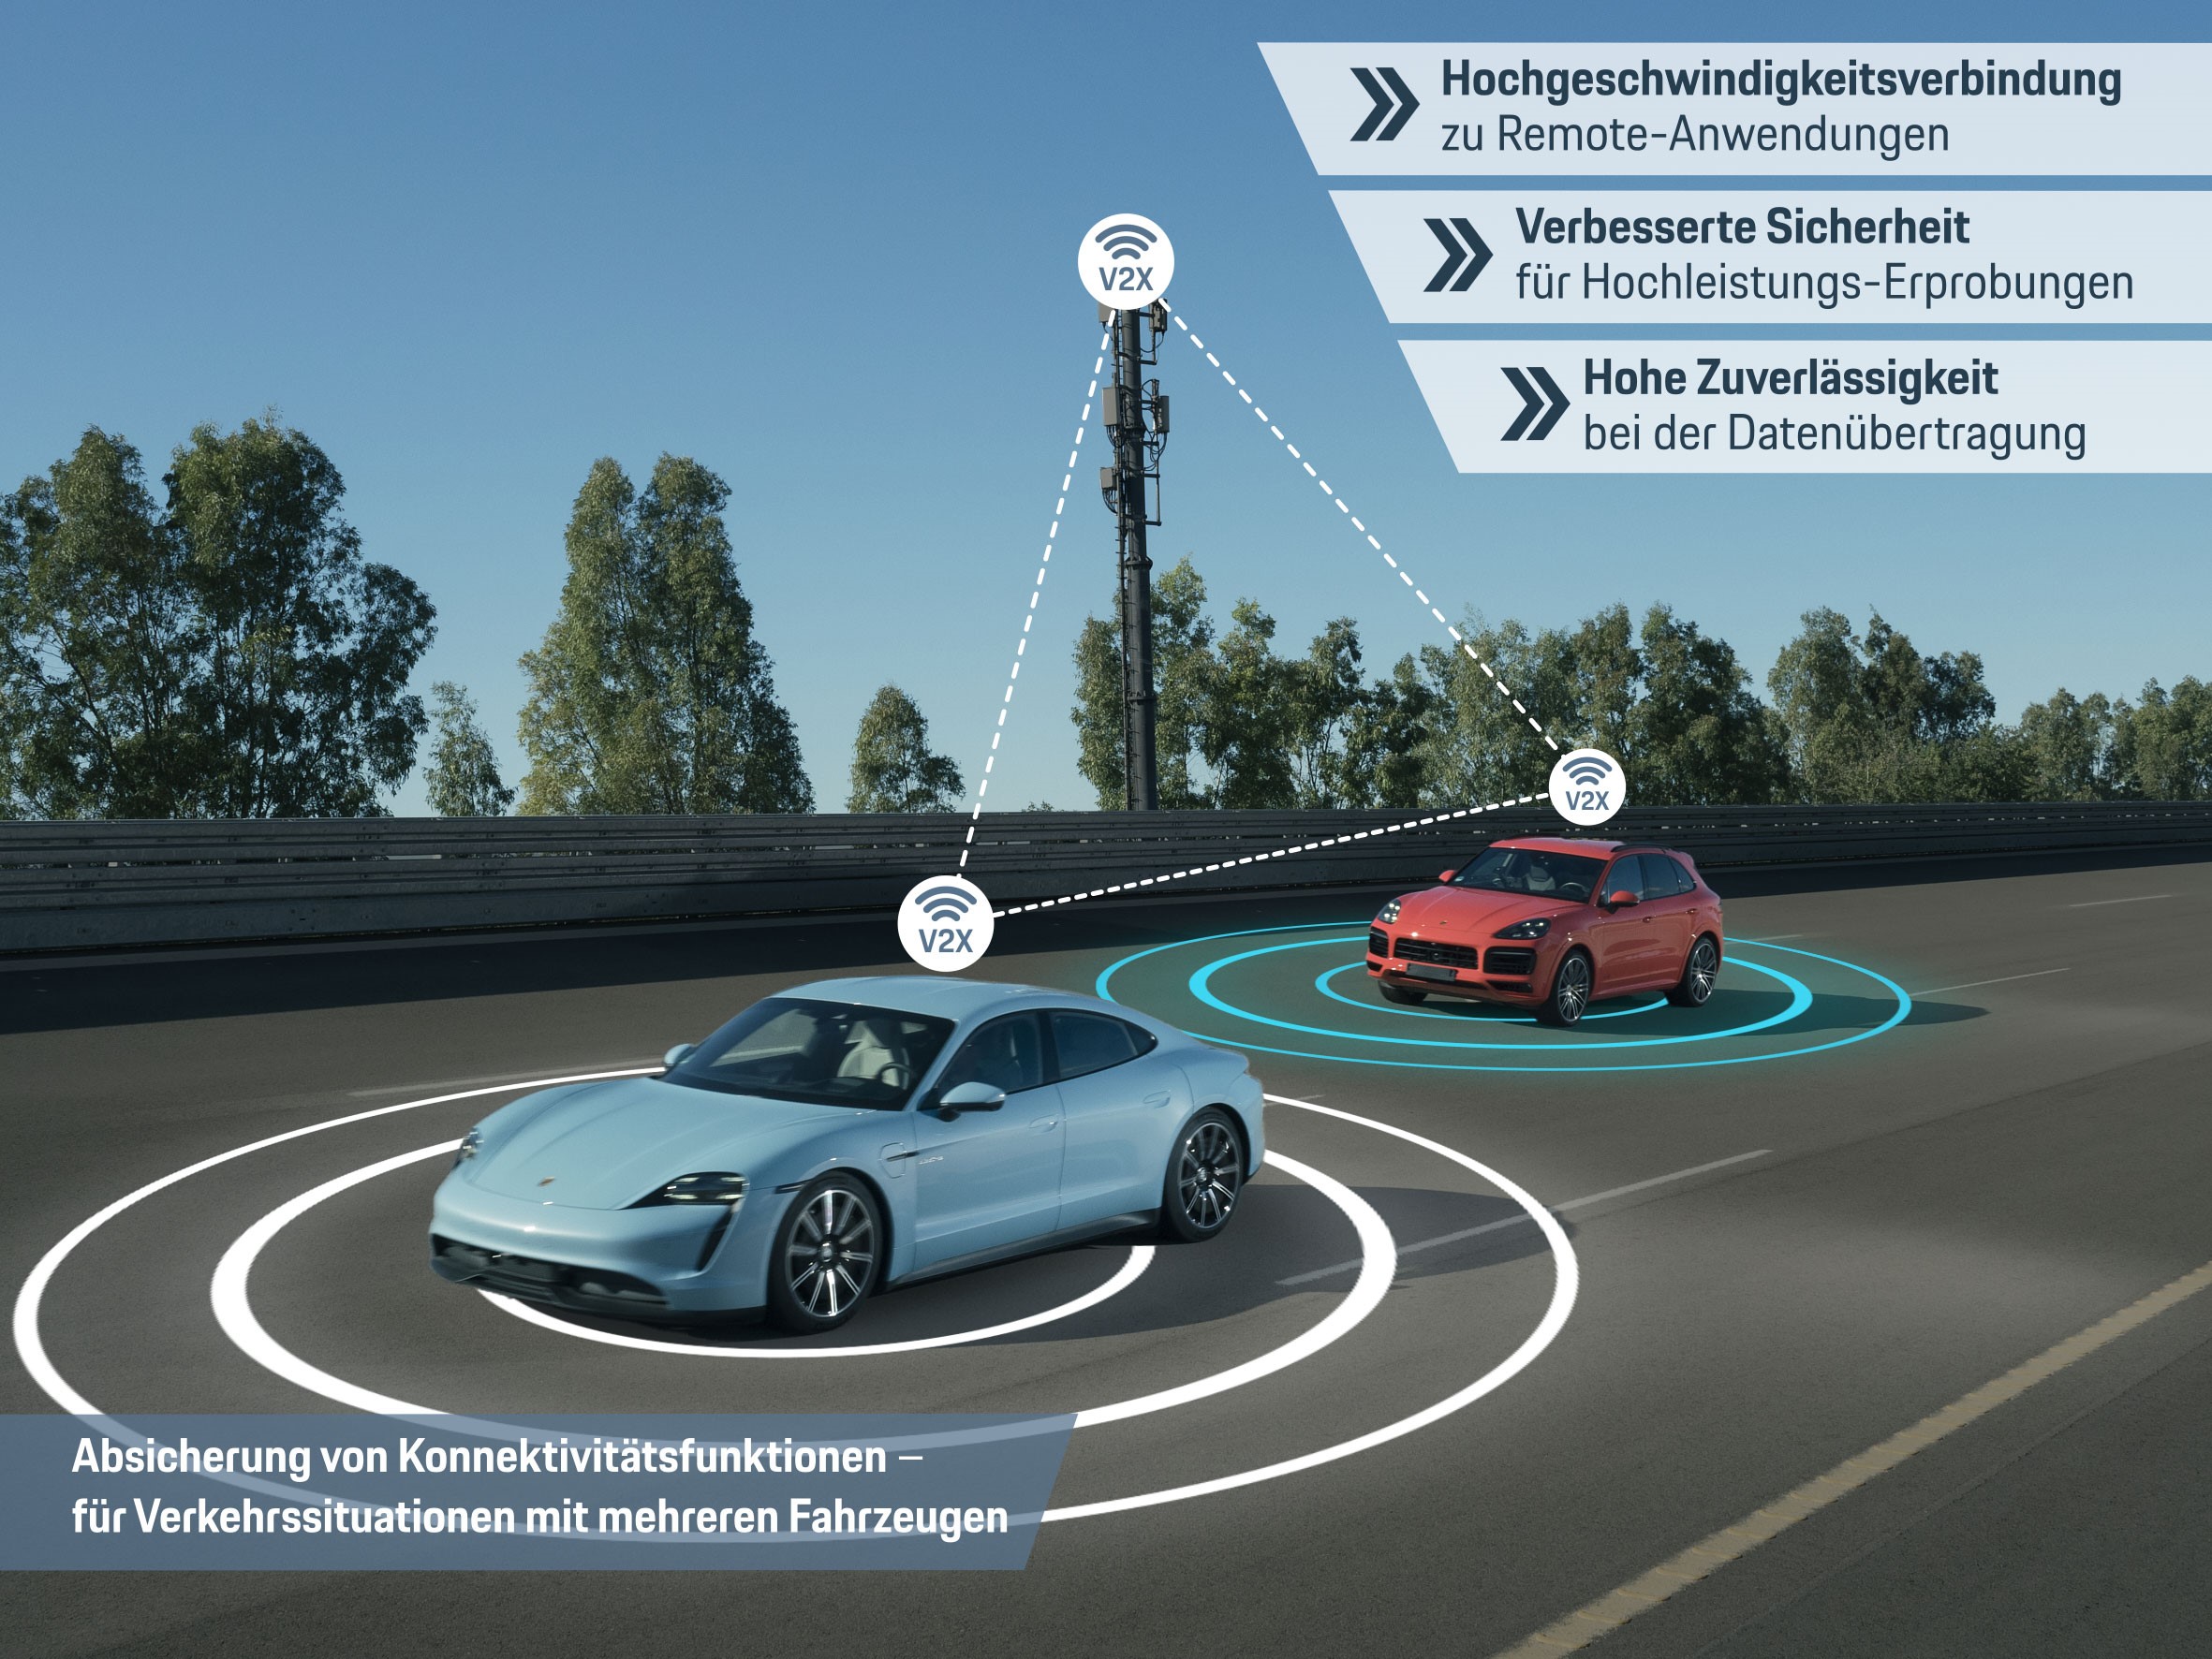 Porsche and Vodafone set up Europe's first hybrid private-public 5G mobile network